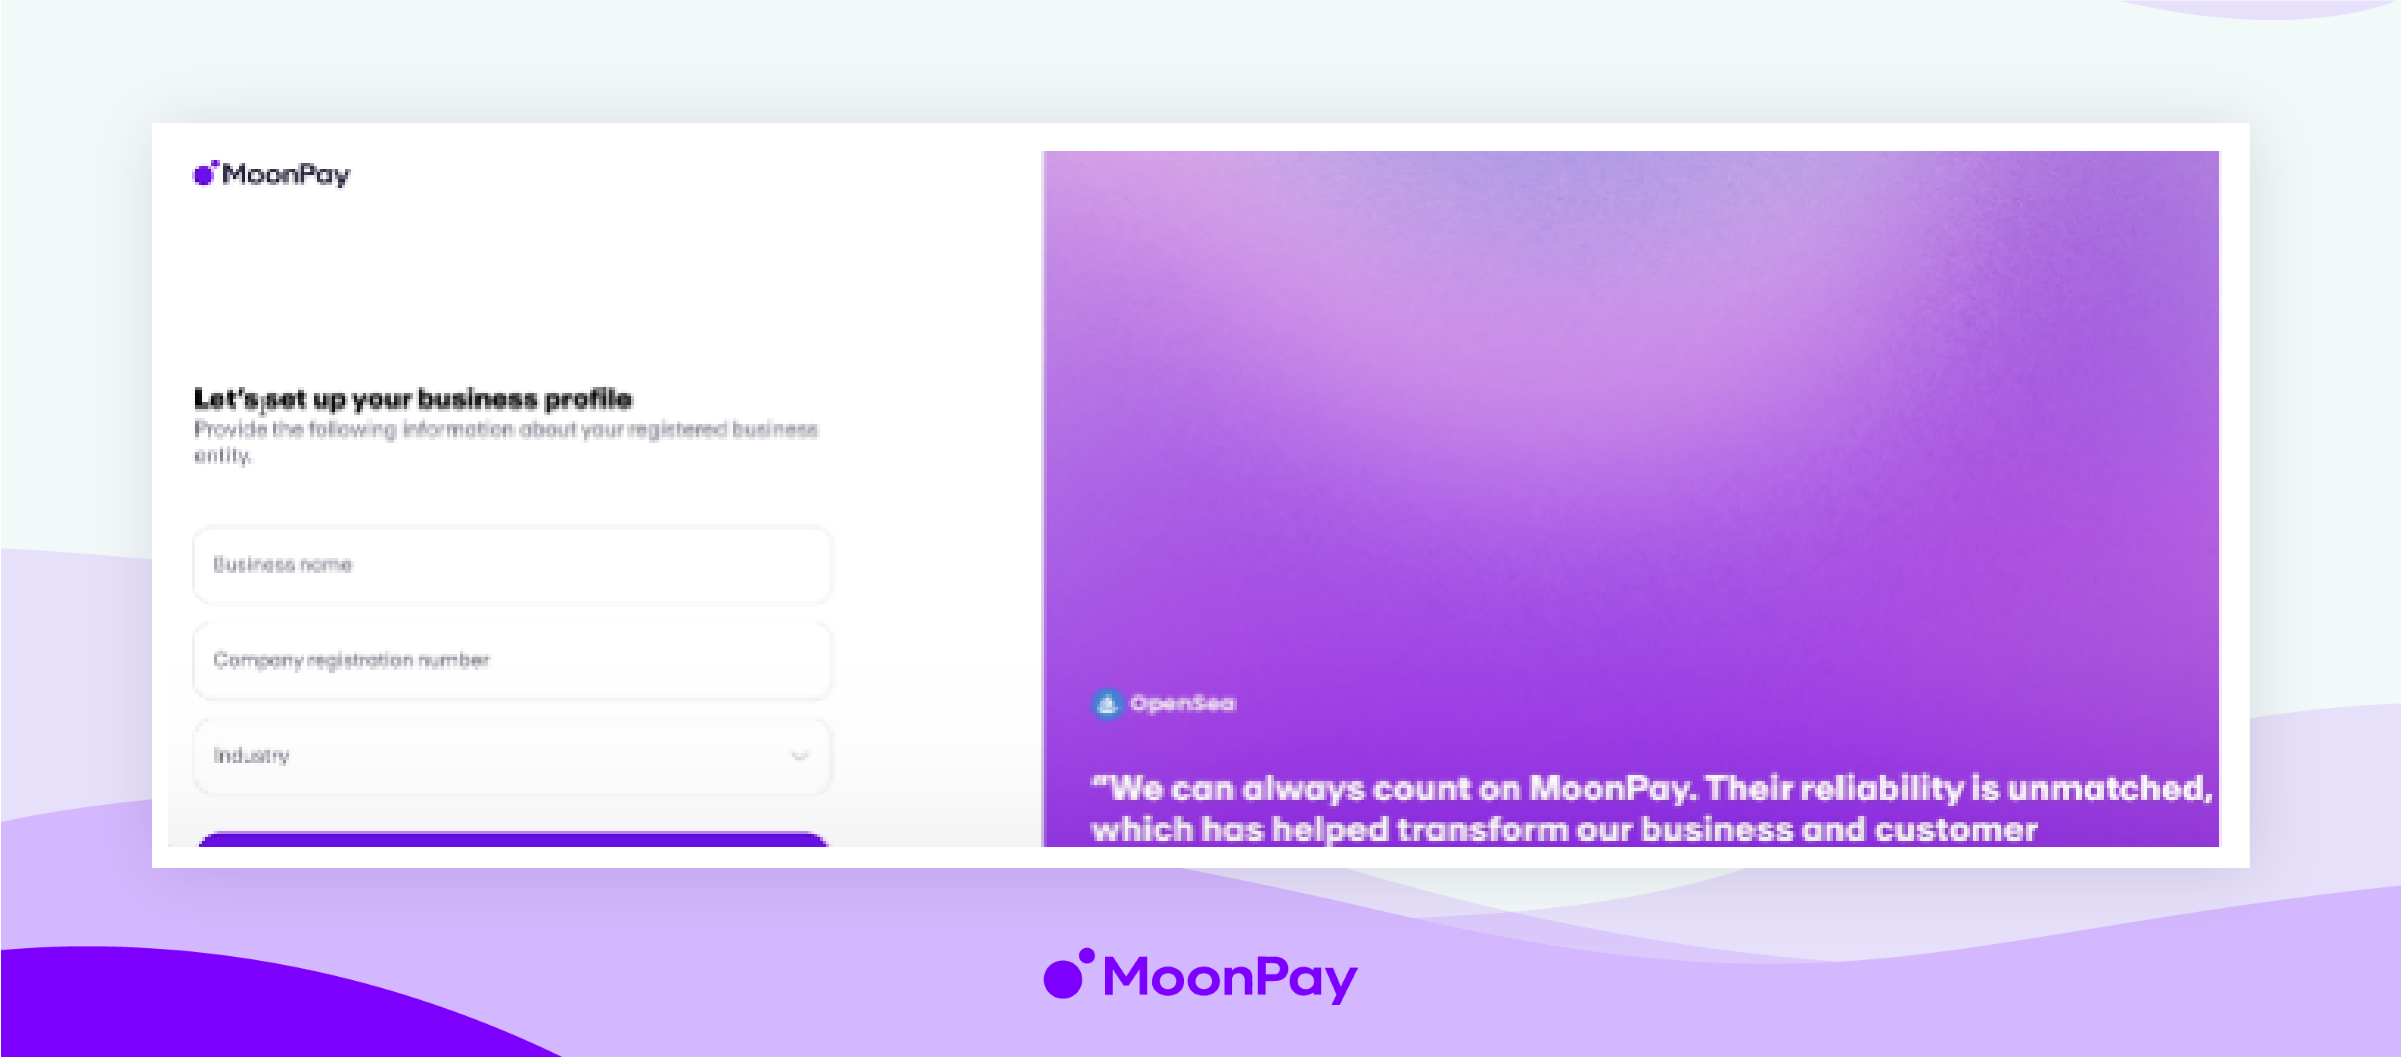 MoonPay's window shows the field to provide the business profile.